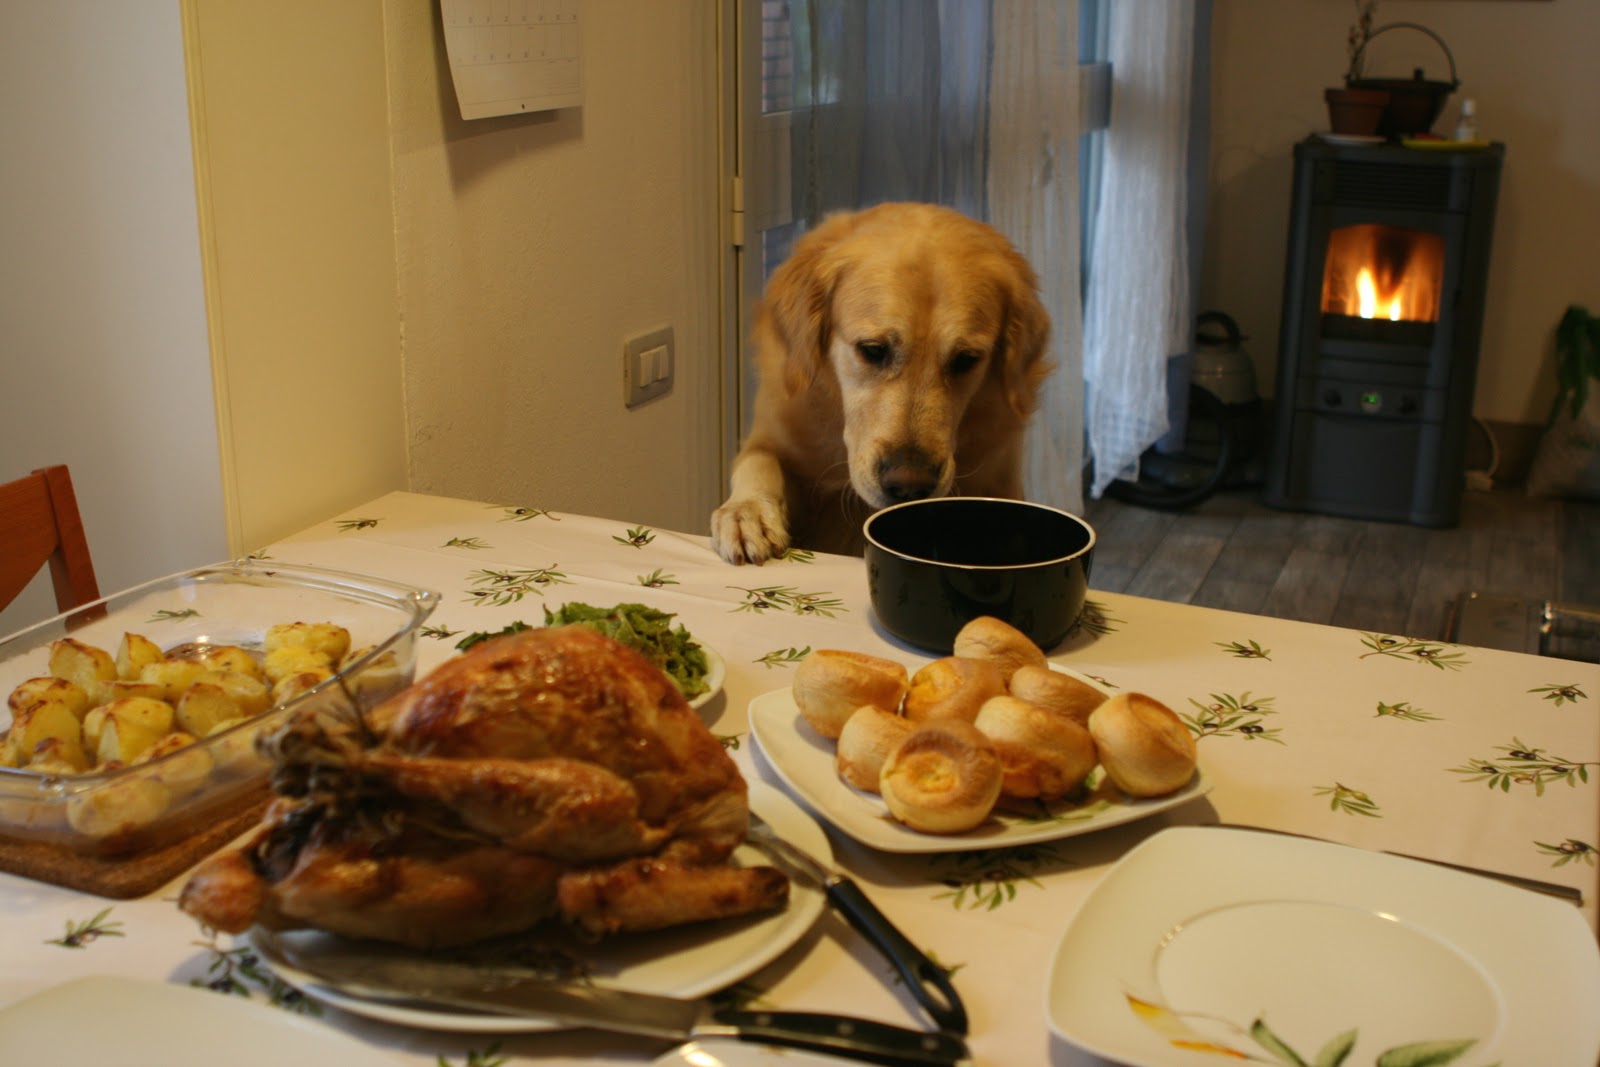 A Golden Retriever staring at the bowl on the table